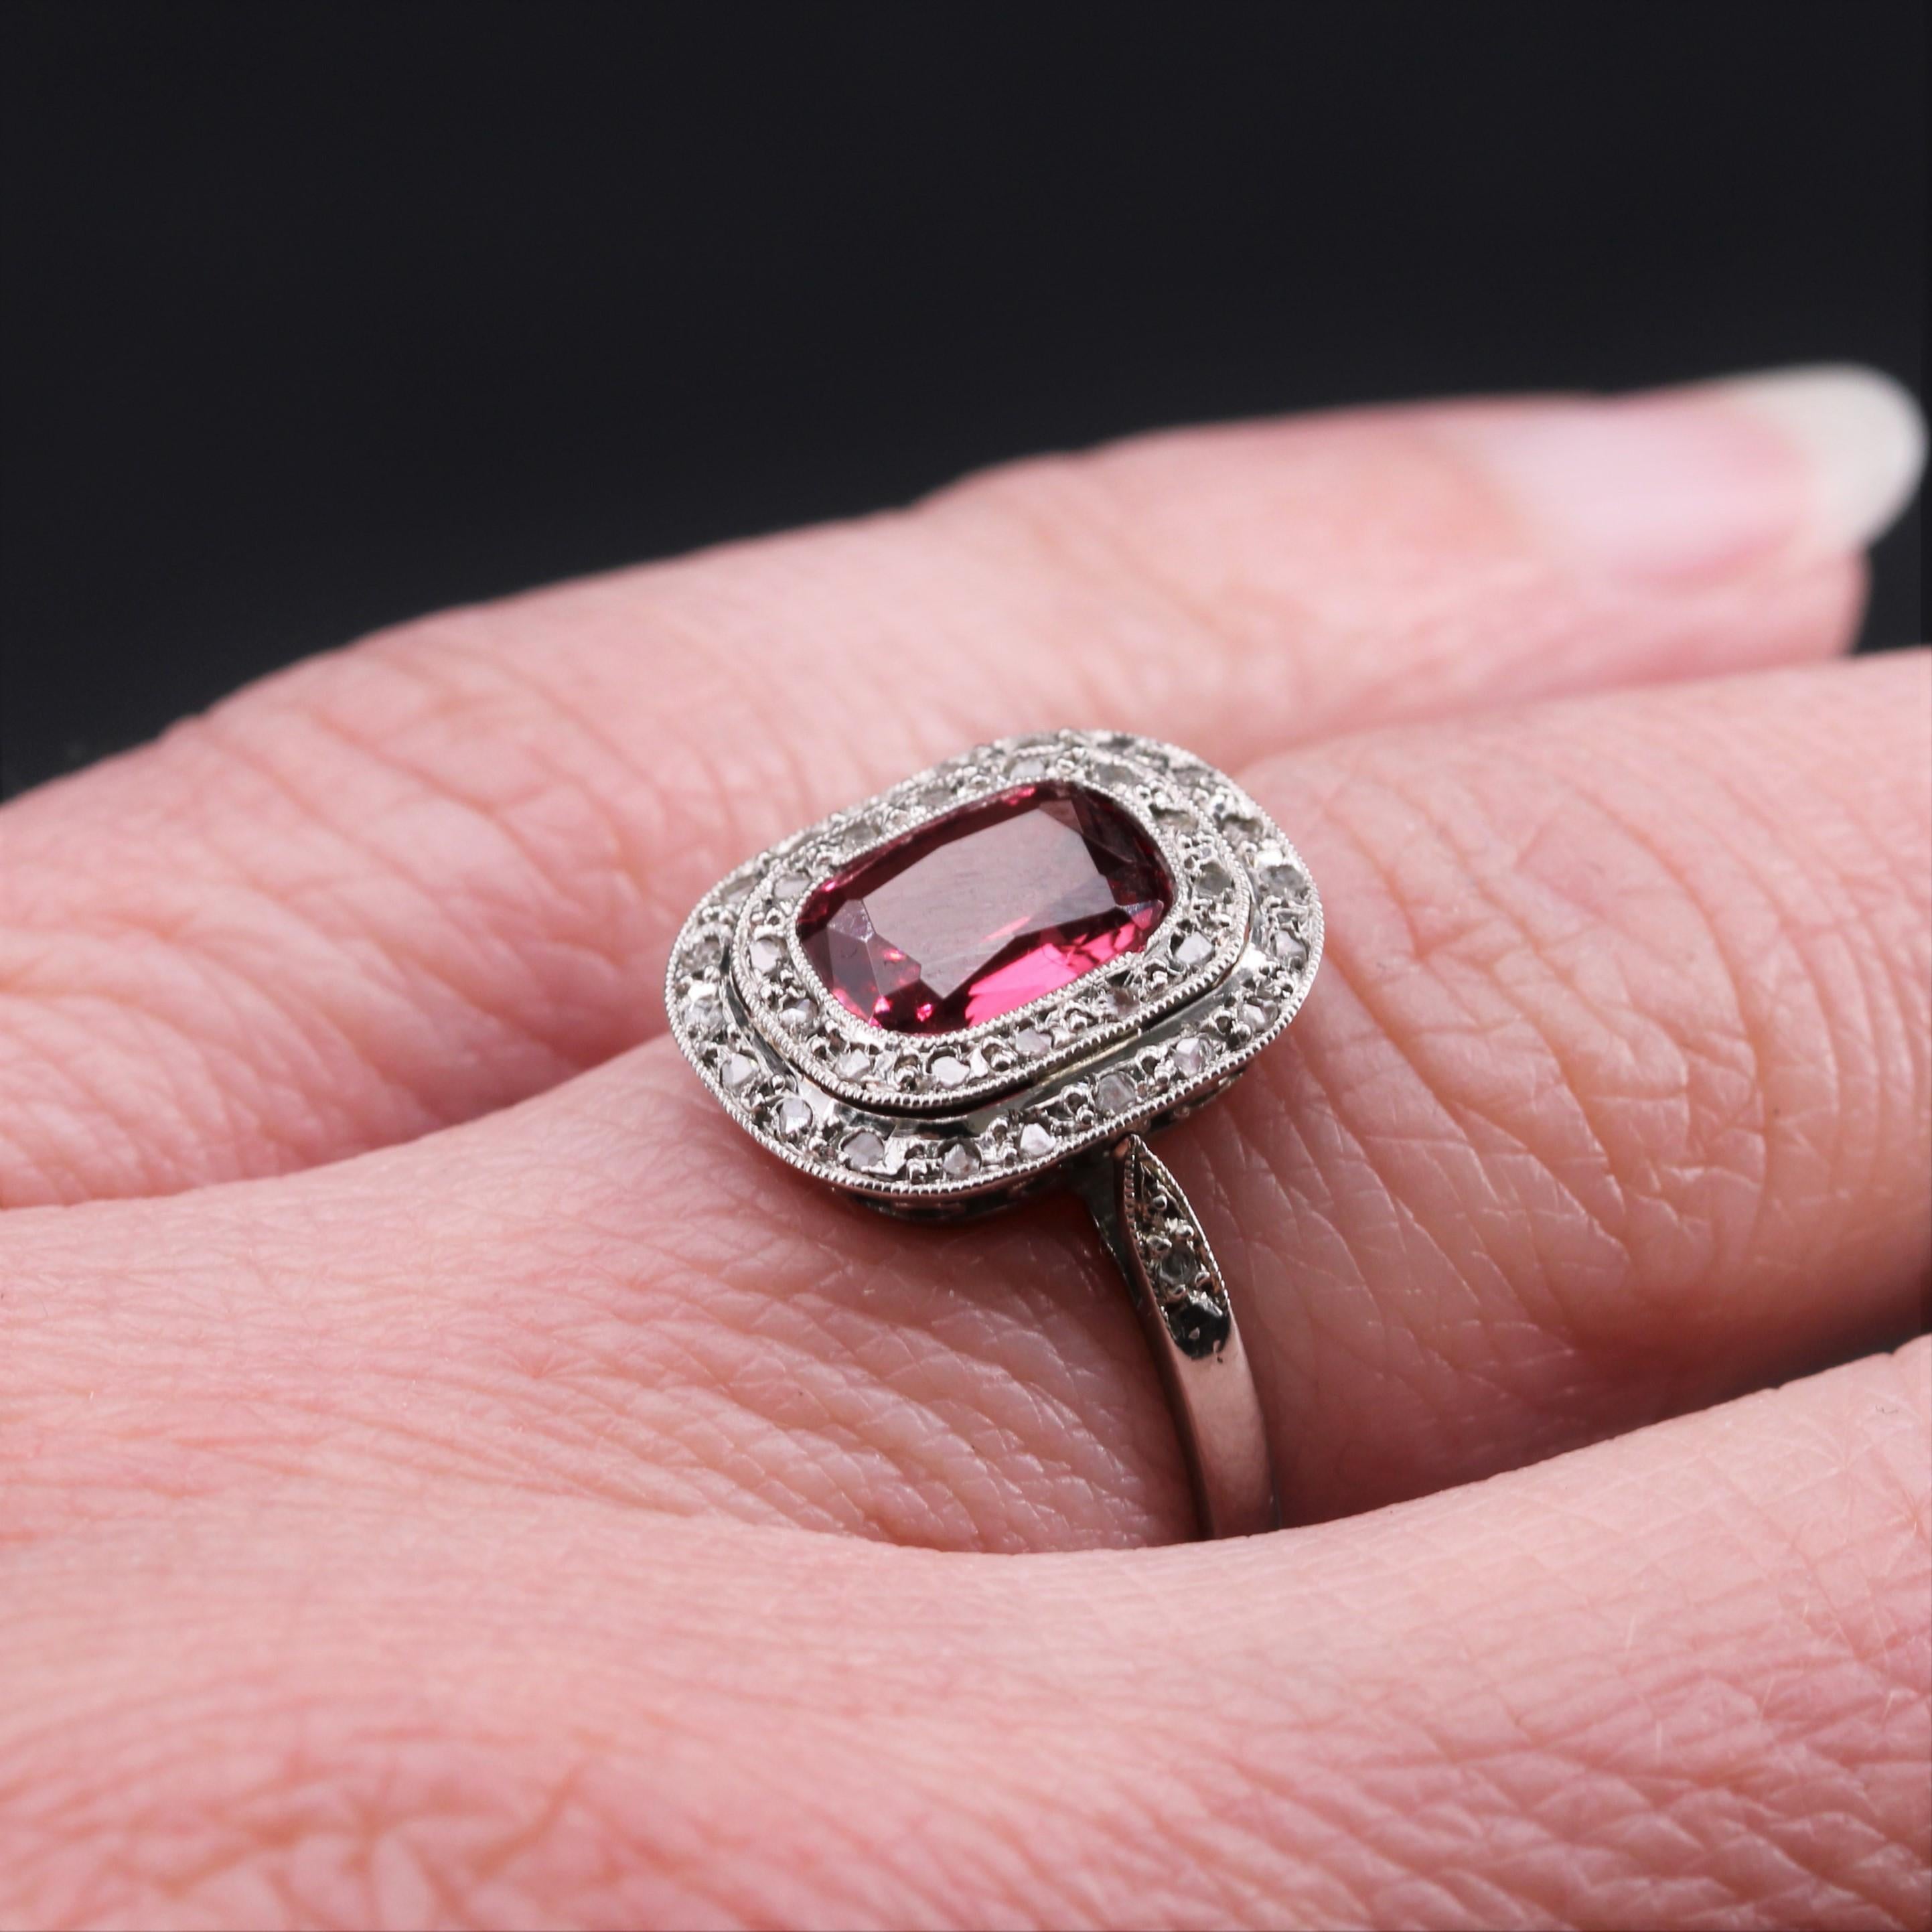 French 1930s 1.20 Carat Red Spinel Diamonds 18 Karat White Gold Ring For Sale 6